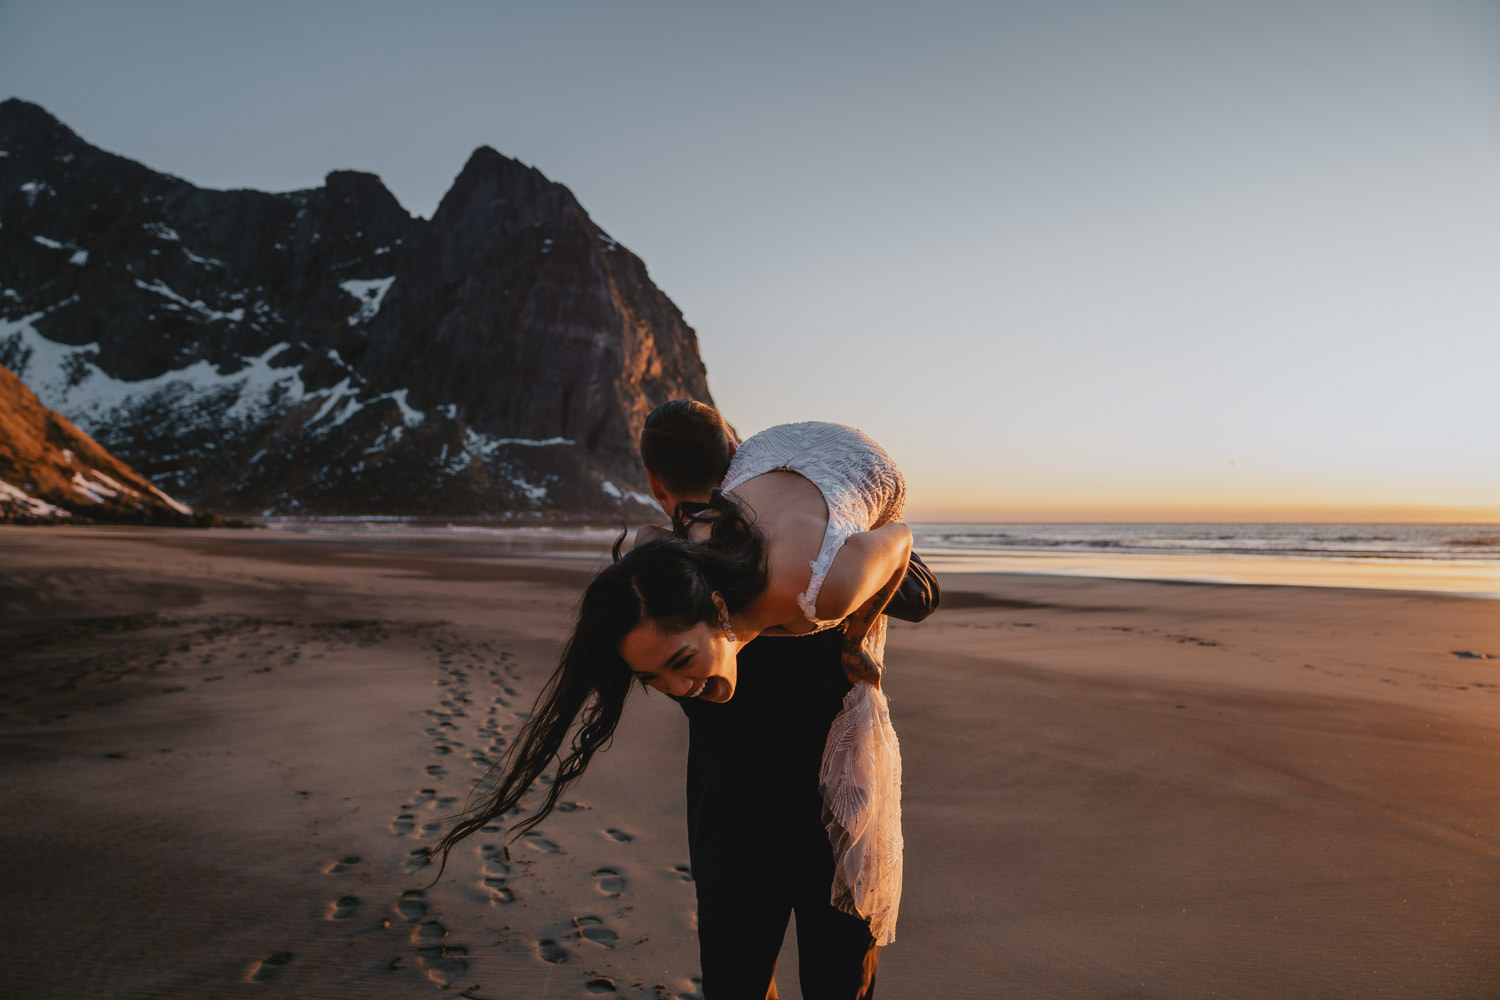 Groom carrying bride over his shoulder on the beach in Lofoten, Norway - photographed by Christin Eide Photography